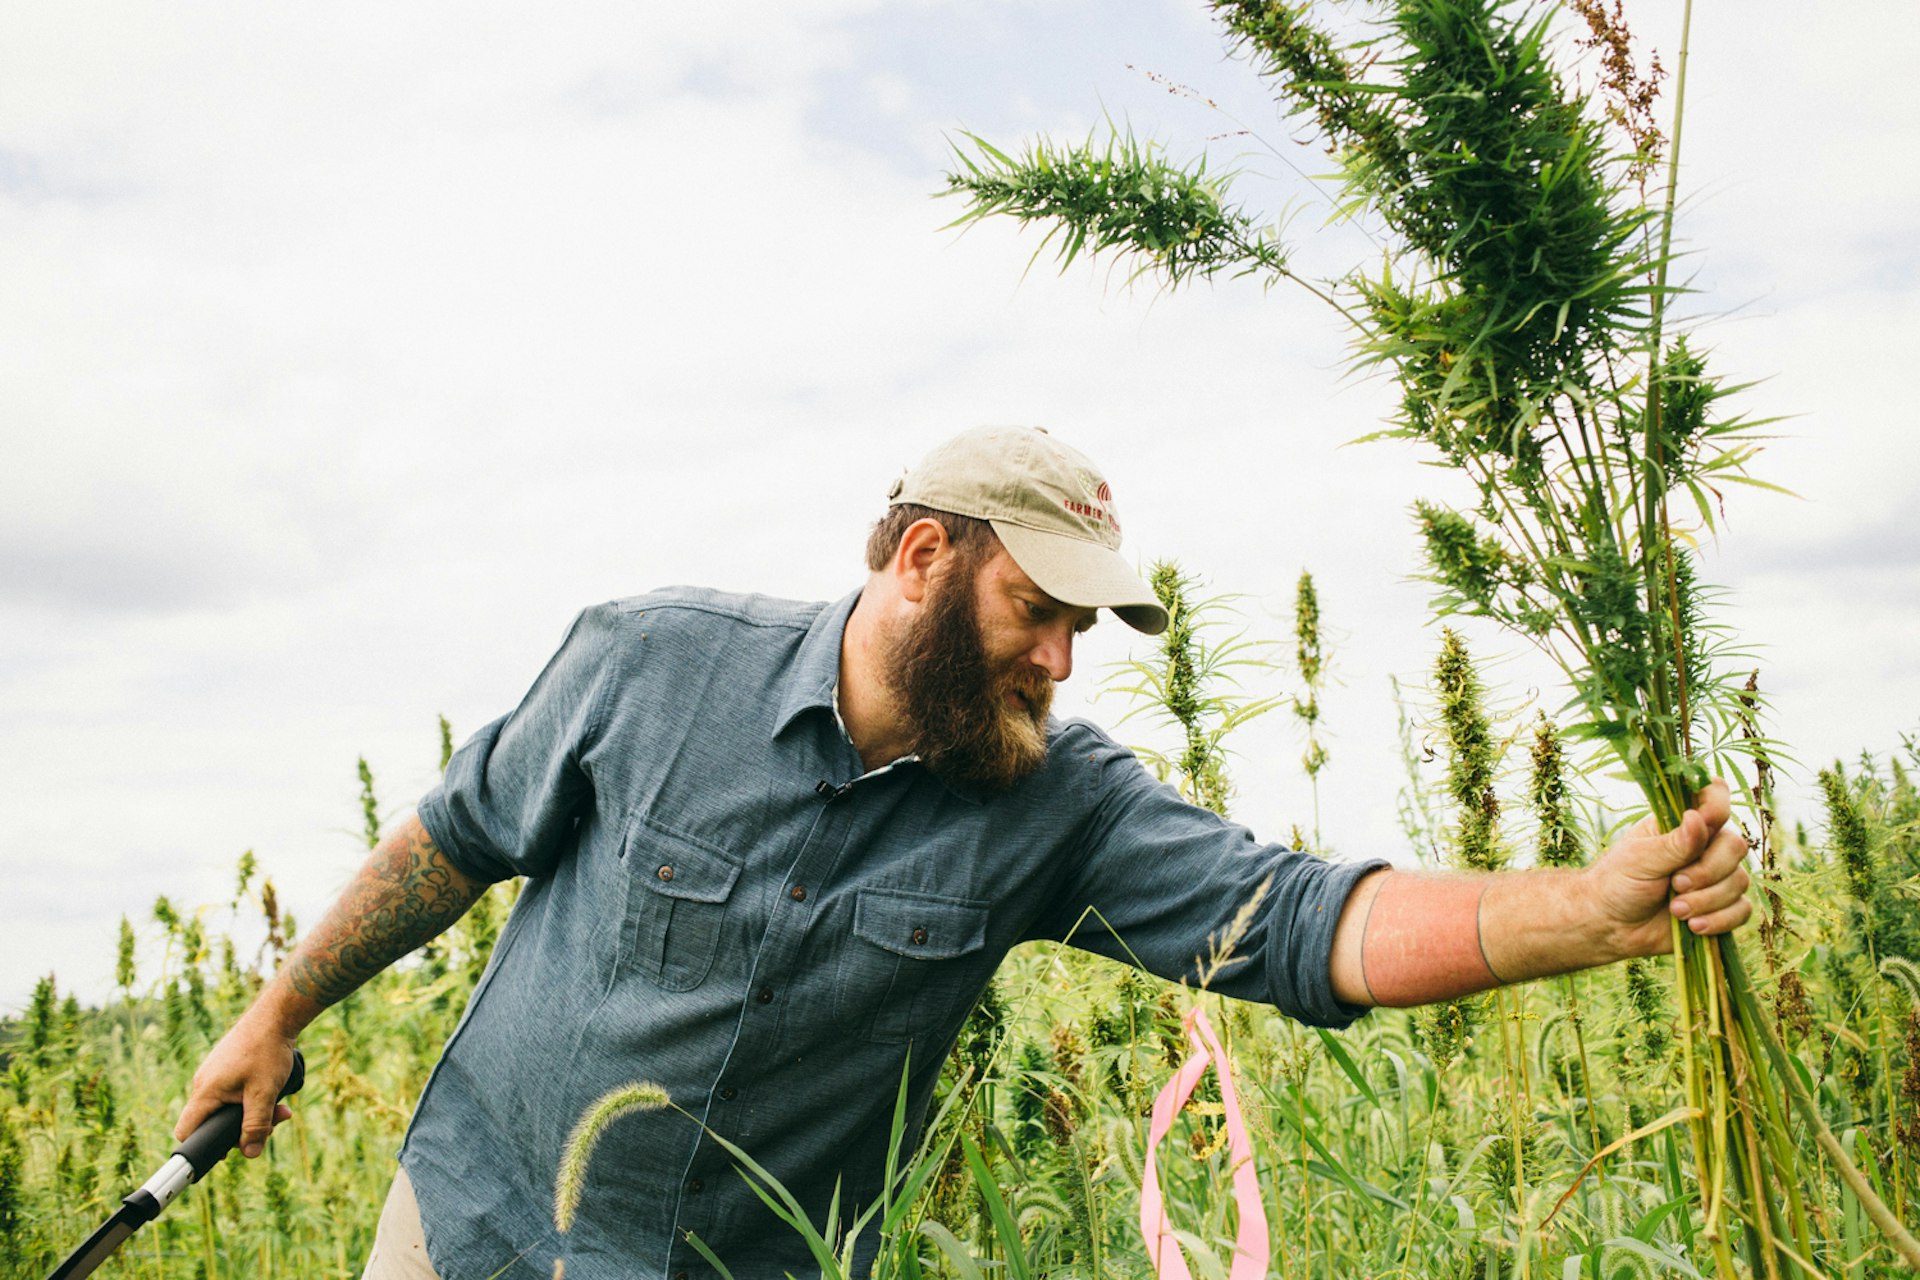 The American military veterans fighting for the right to grow hemp